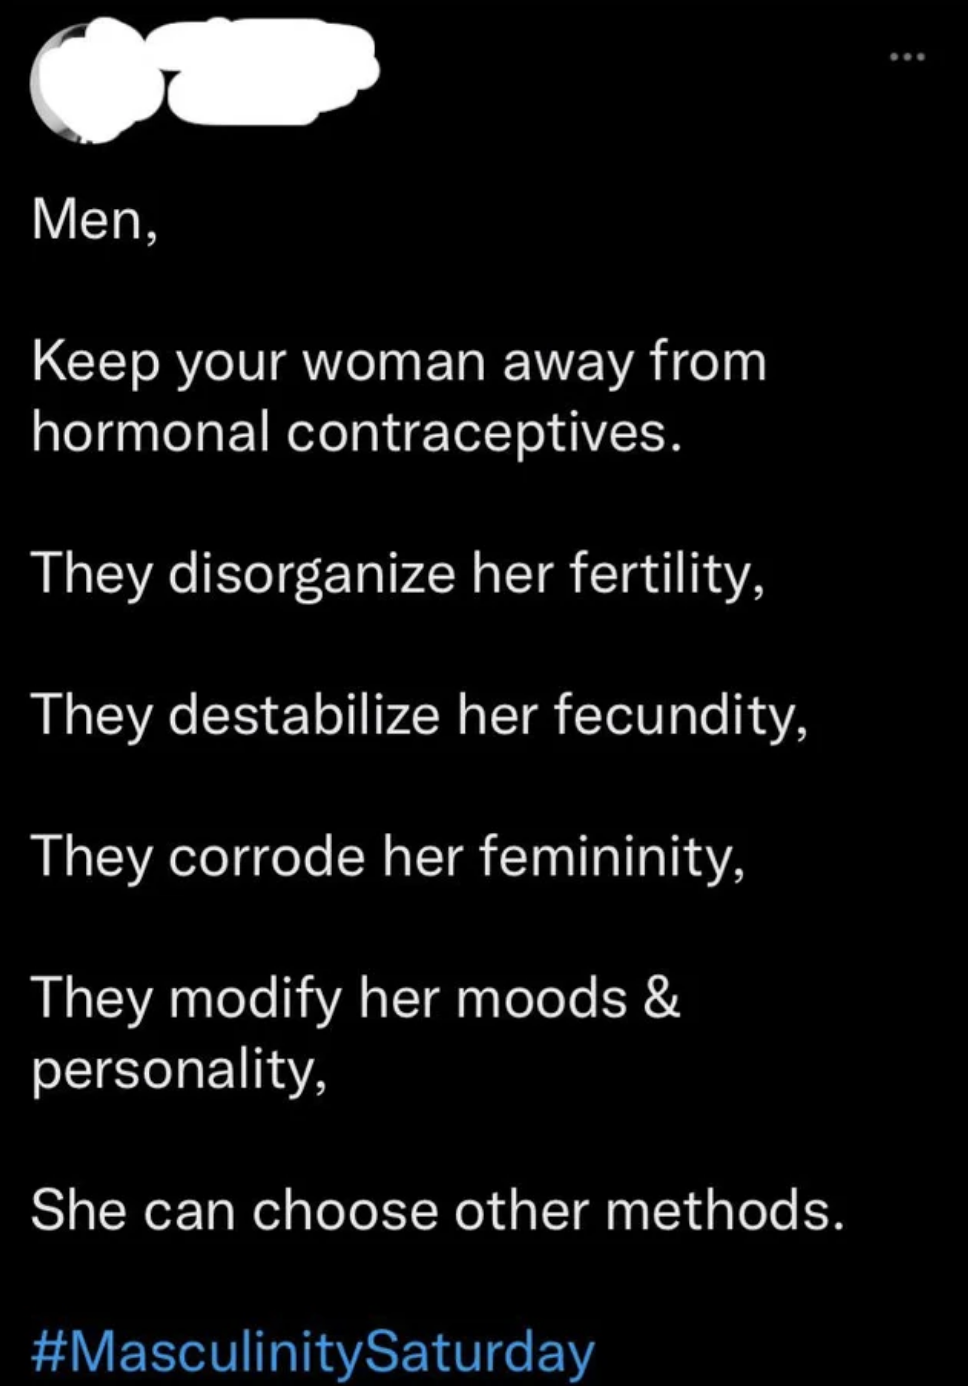 &quot;Keep your woman away from hormonal contraceptives: They destabilize her fecundity, modify her moods and personality; she can choose other methods&quot;